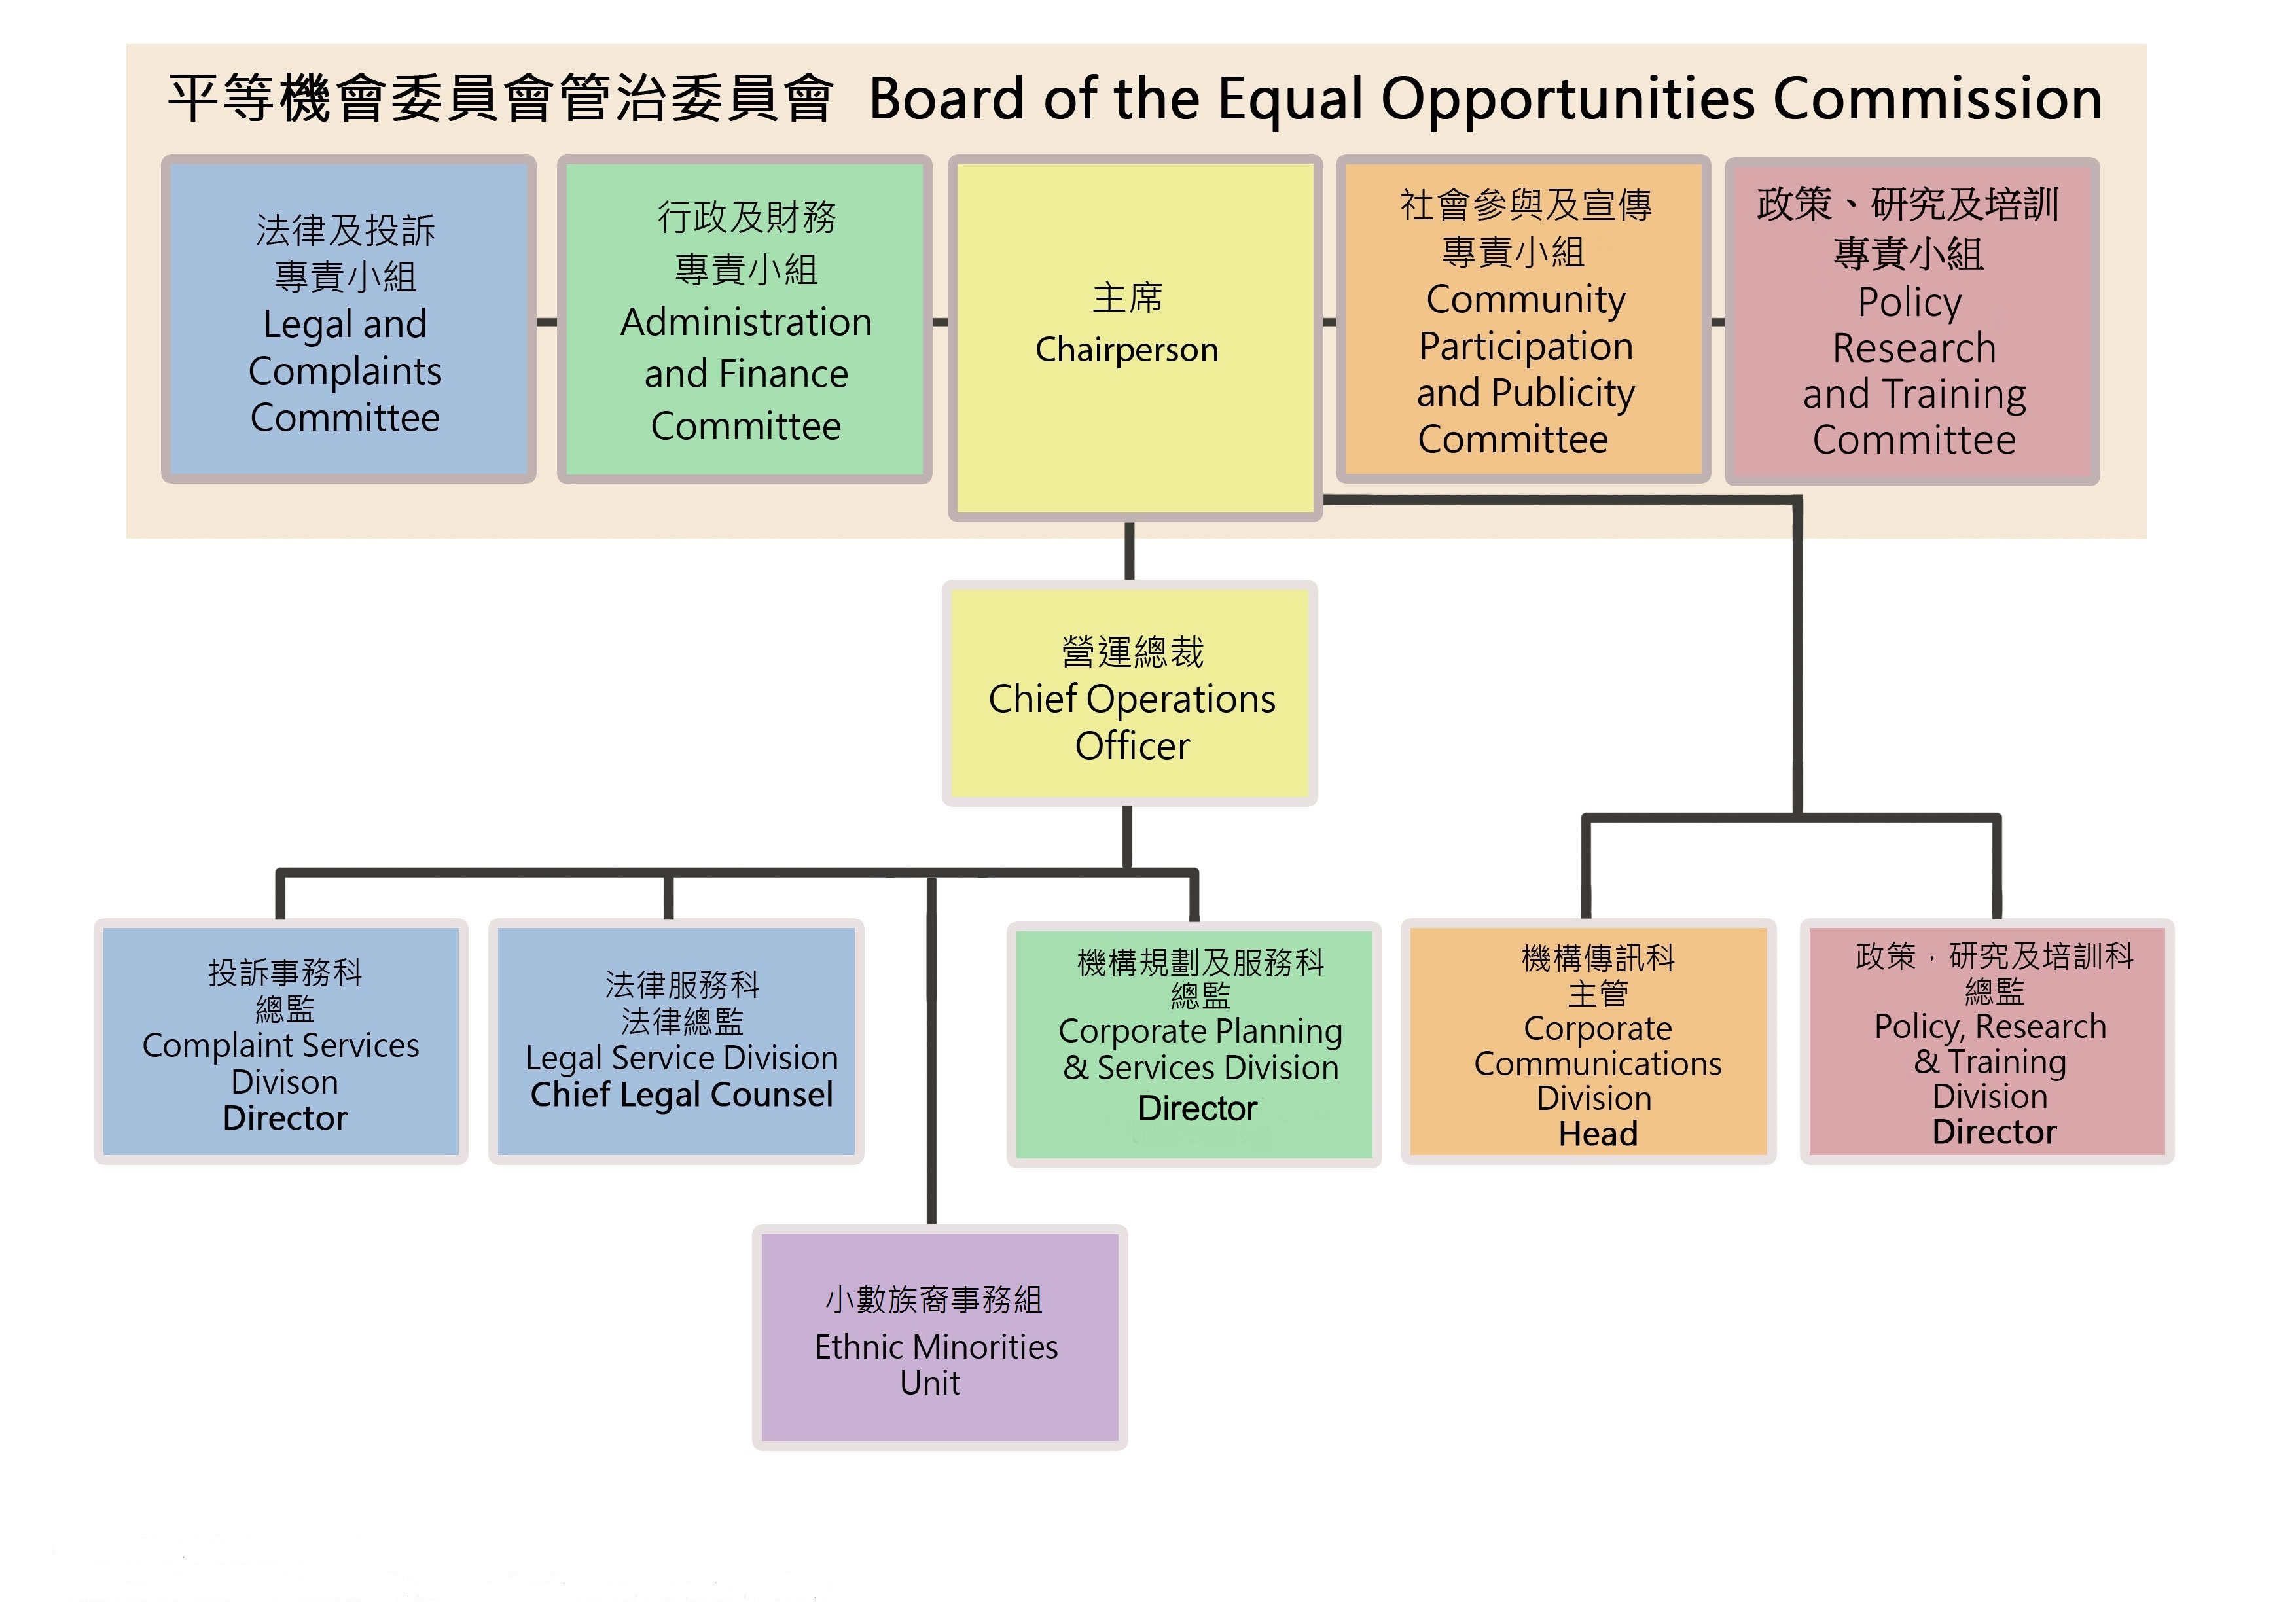 Organisational Structure of the Equal Opportunities Commission